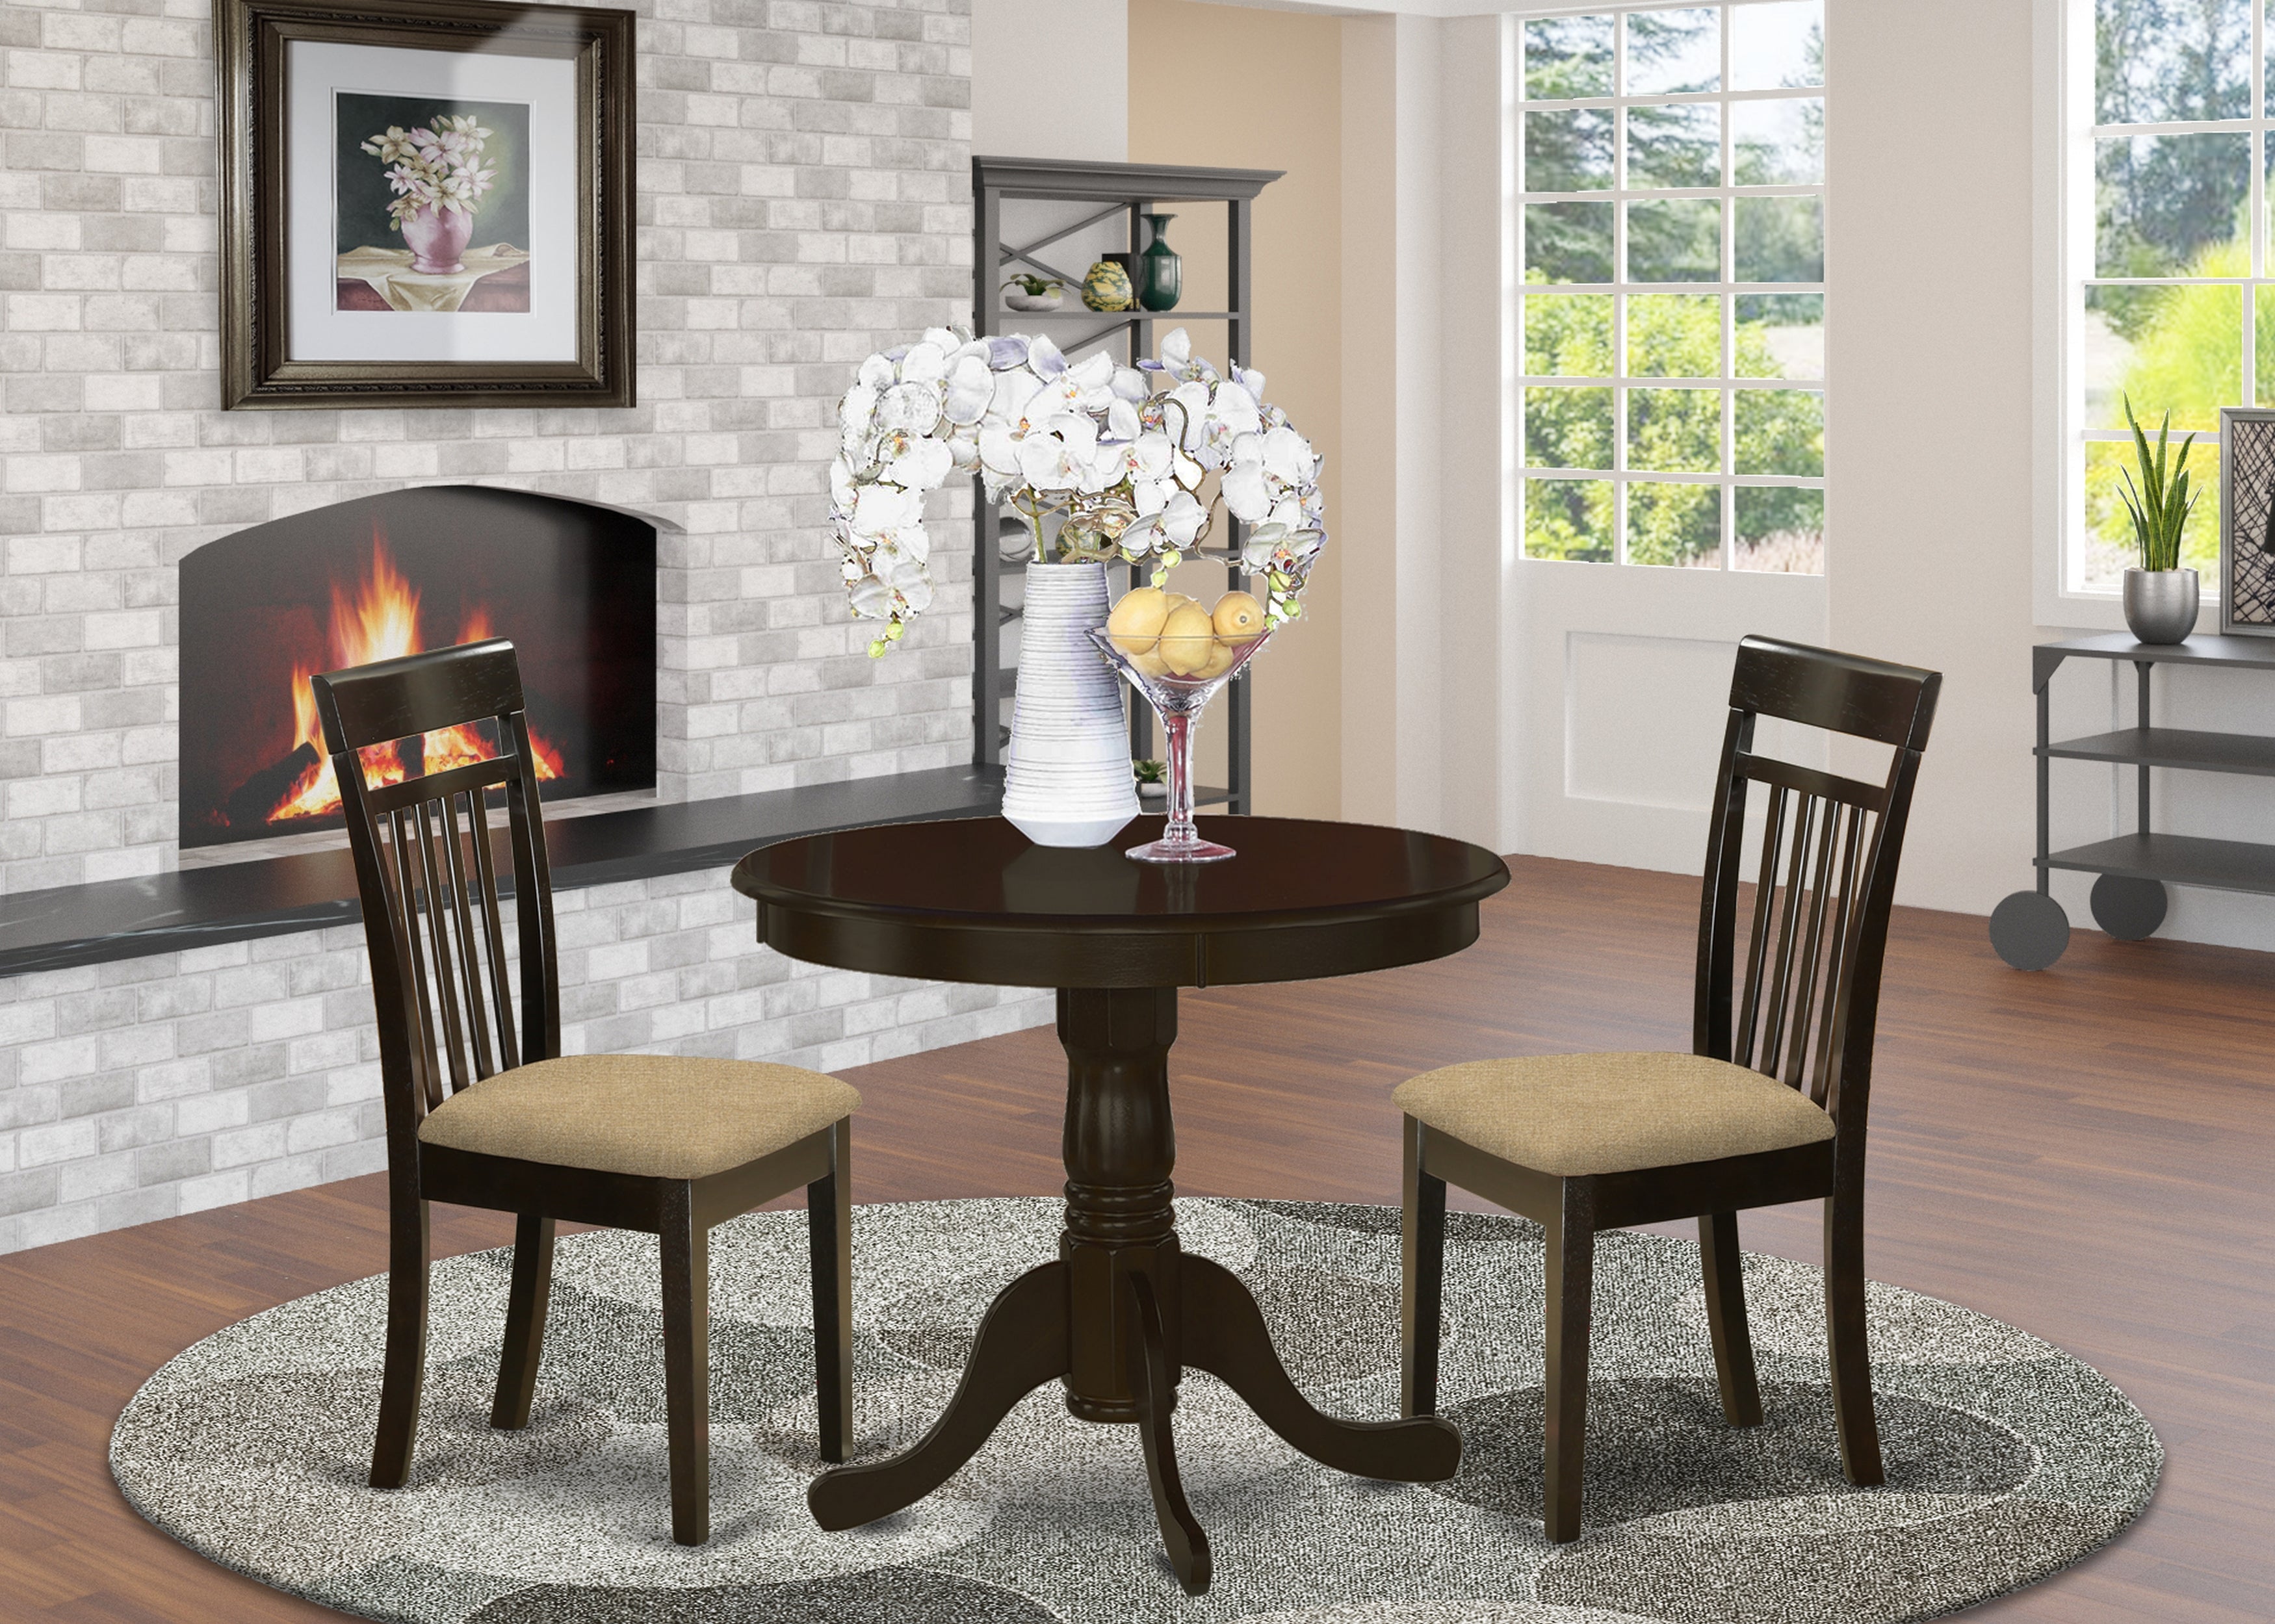 ANCA3-CAP-C 3 Pc small Kitchen Table set-breakfast nook plus 2 dinette Chairs